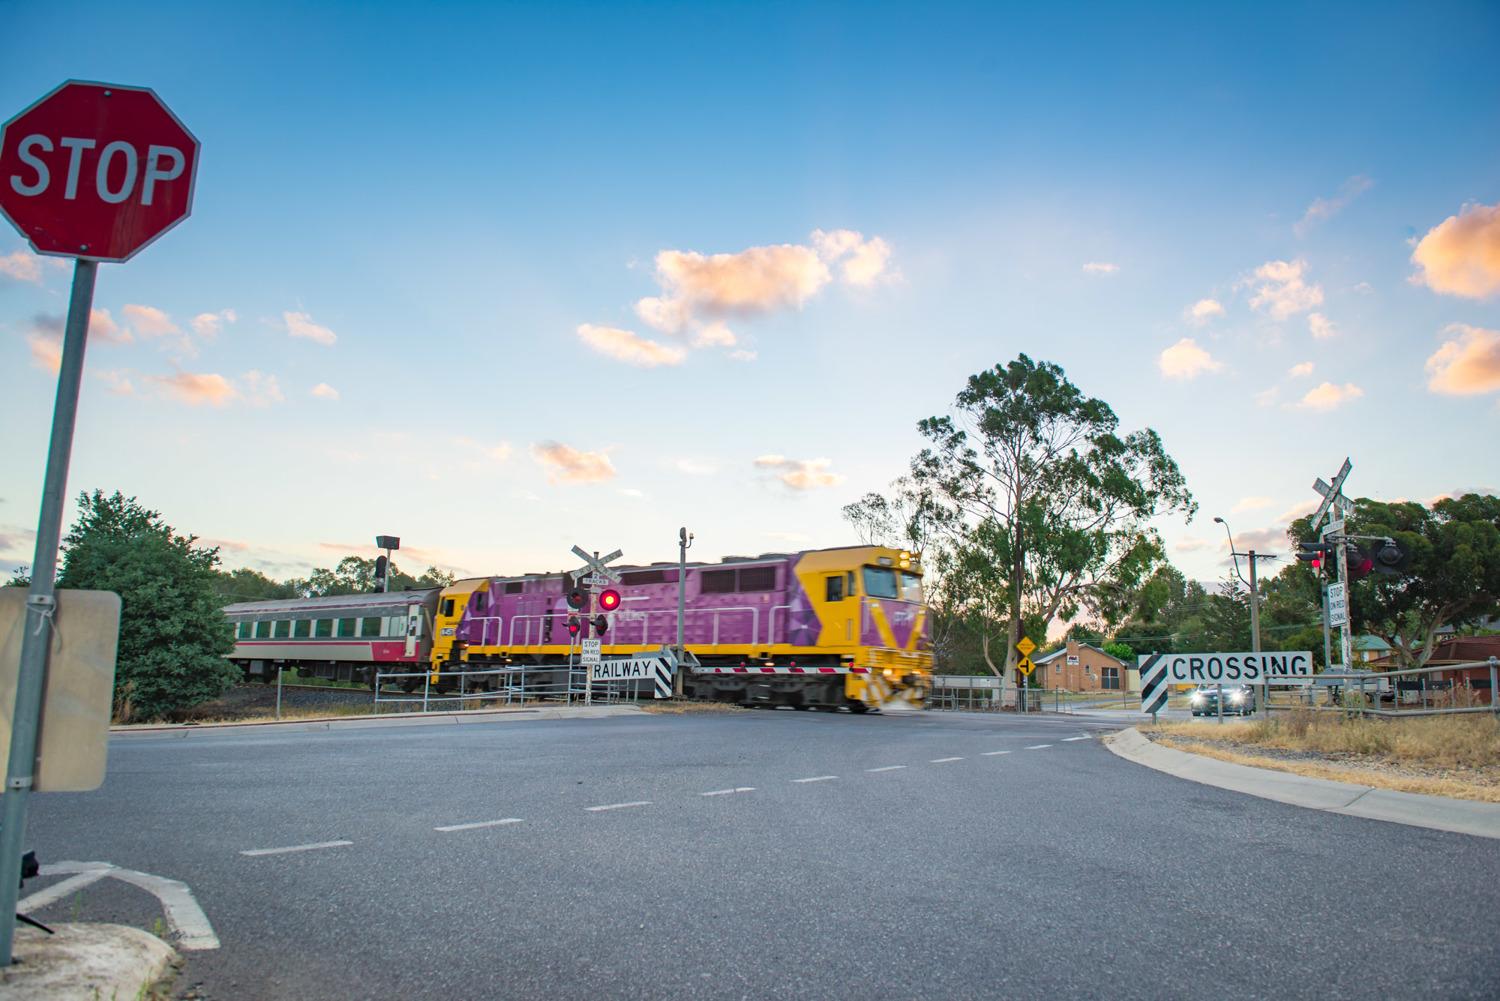 Seymour level crossing with a train passing through.